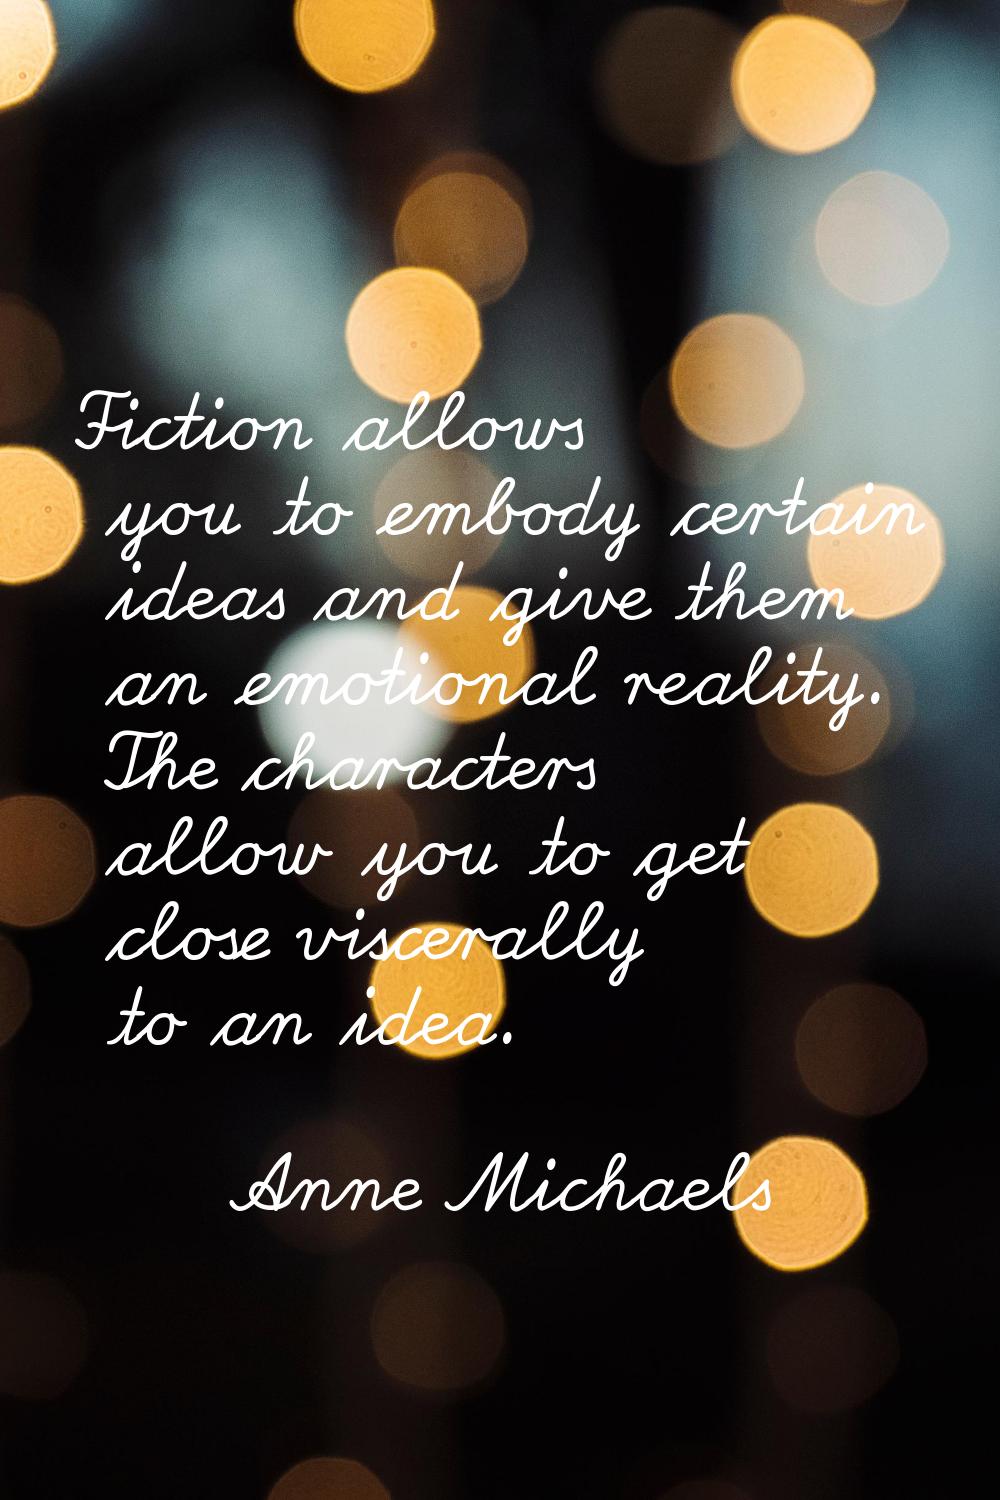 Fiction allows you to embody certain ideas and give them an emotional reality. The characters allow